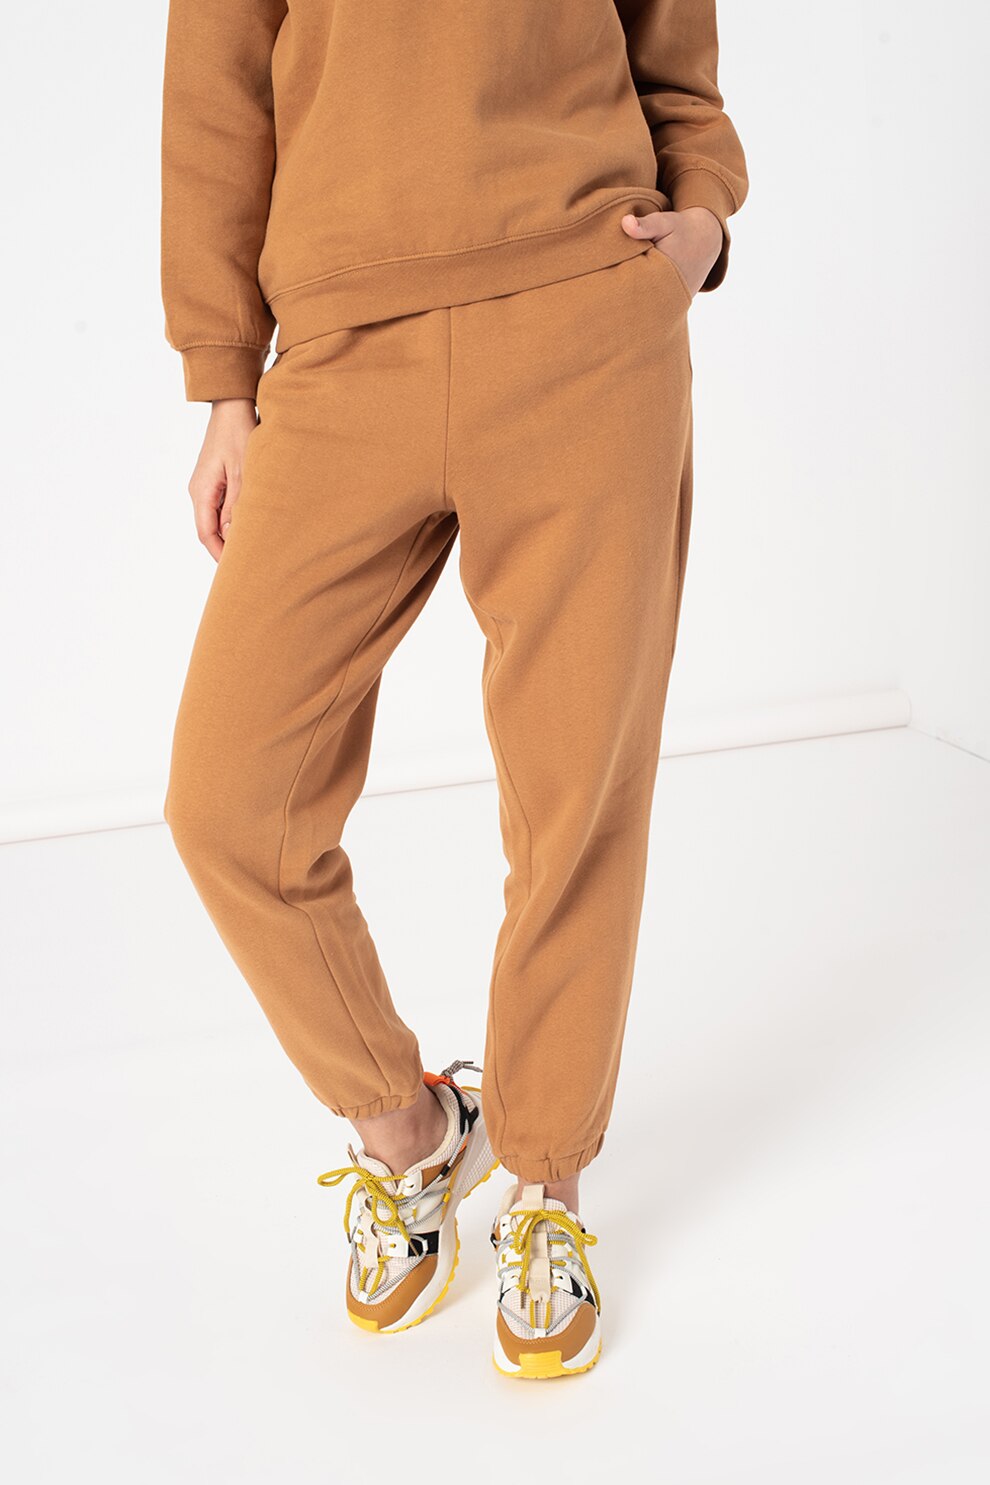 accumulate Controversial oil Tom Tailor, Pantaloni sport relaxed fit, Maro caramel, XL - eMAG.ro